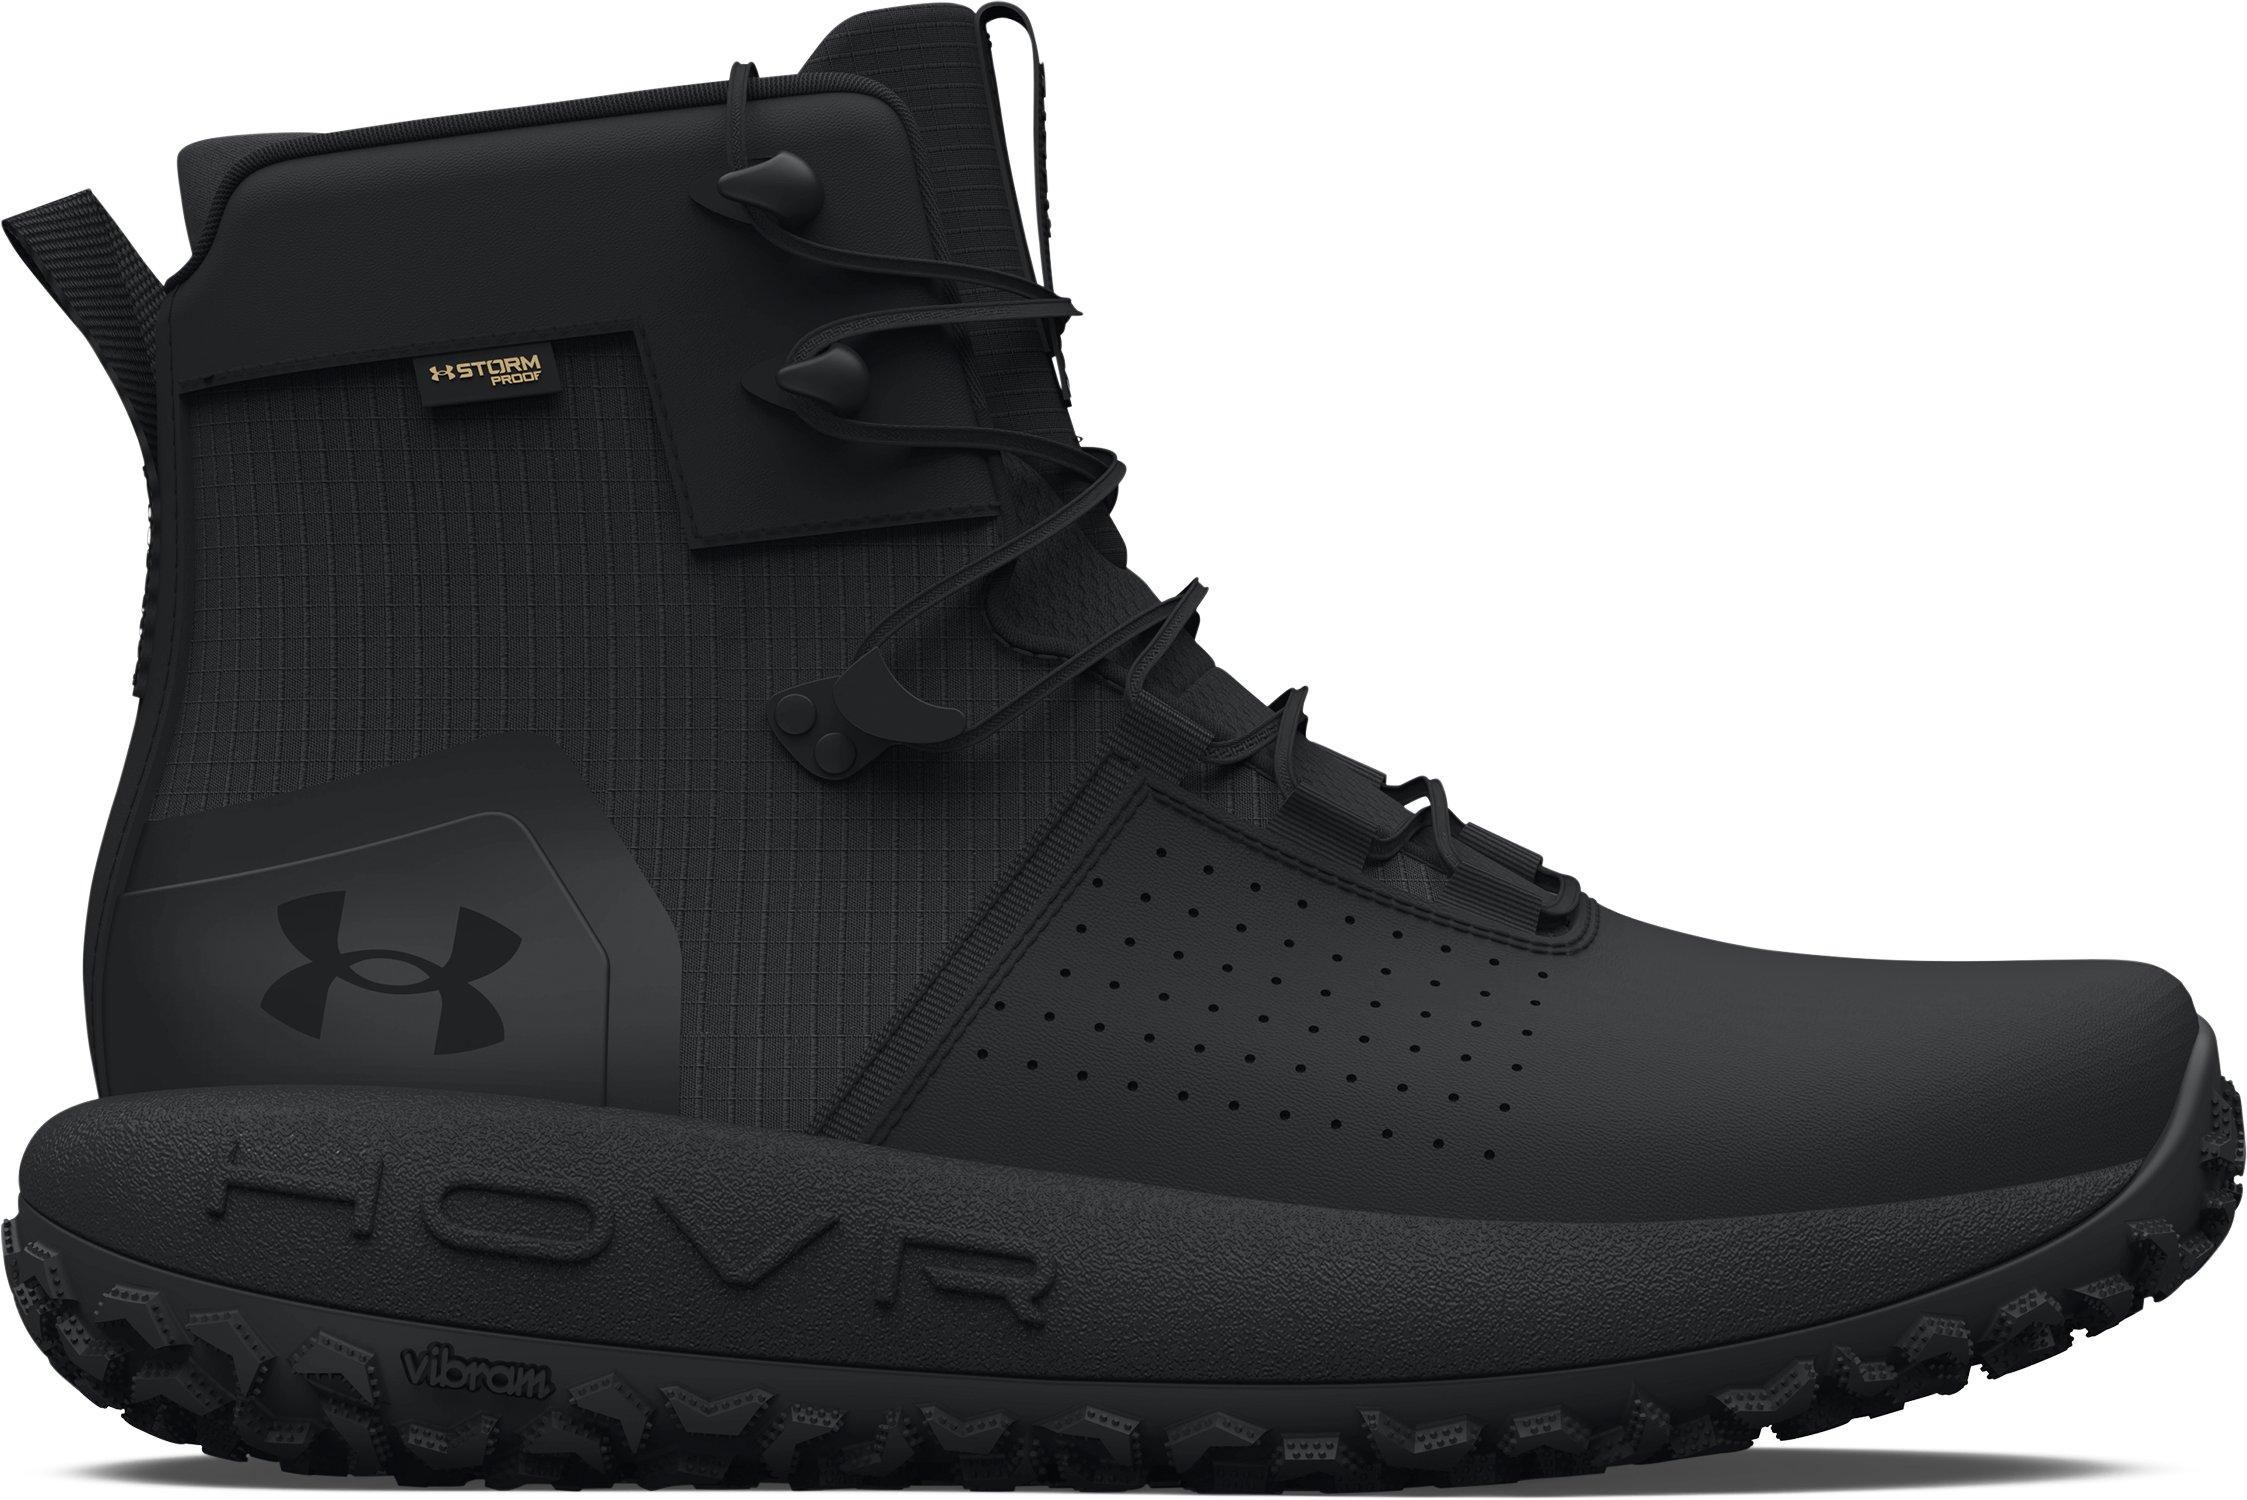 Under Armour Hovrtm Infil Waterproof Tactical Boots in Black for